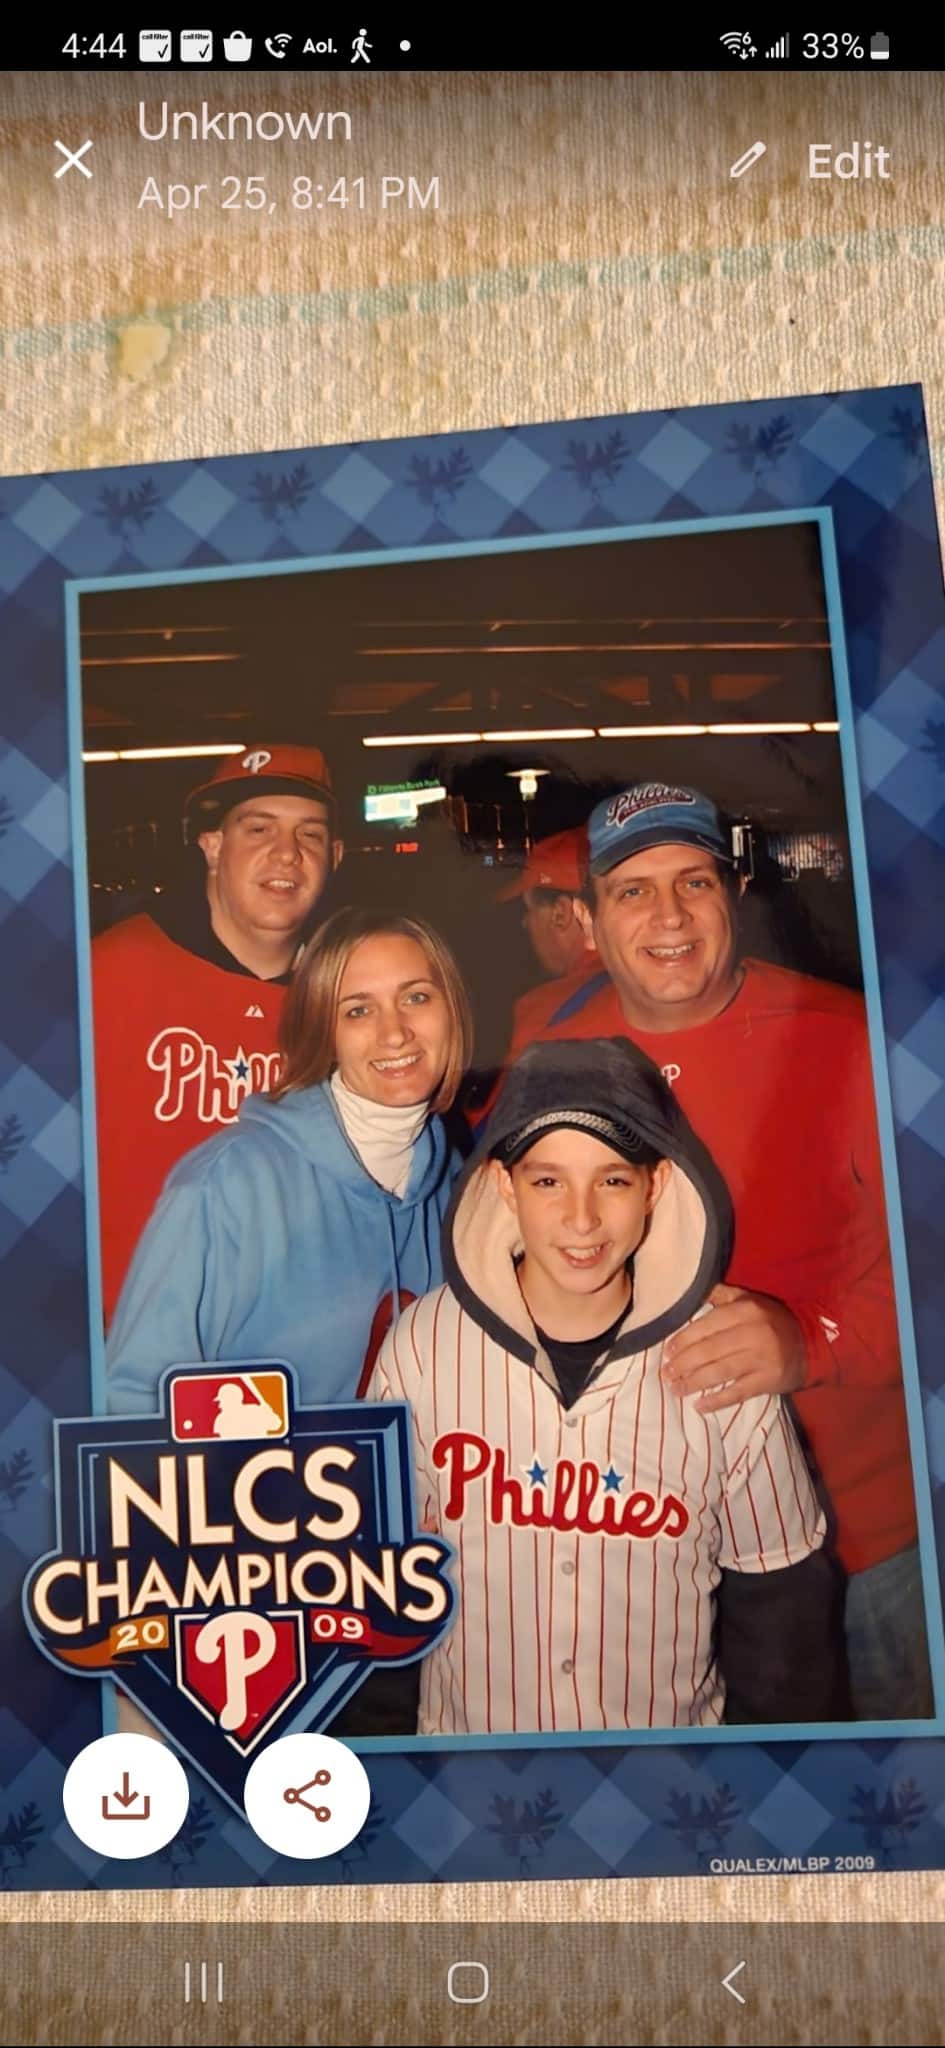 These Phillies are bringing Philadelphia area families together more than ever before